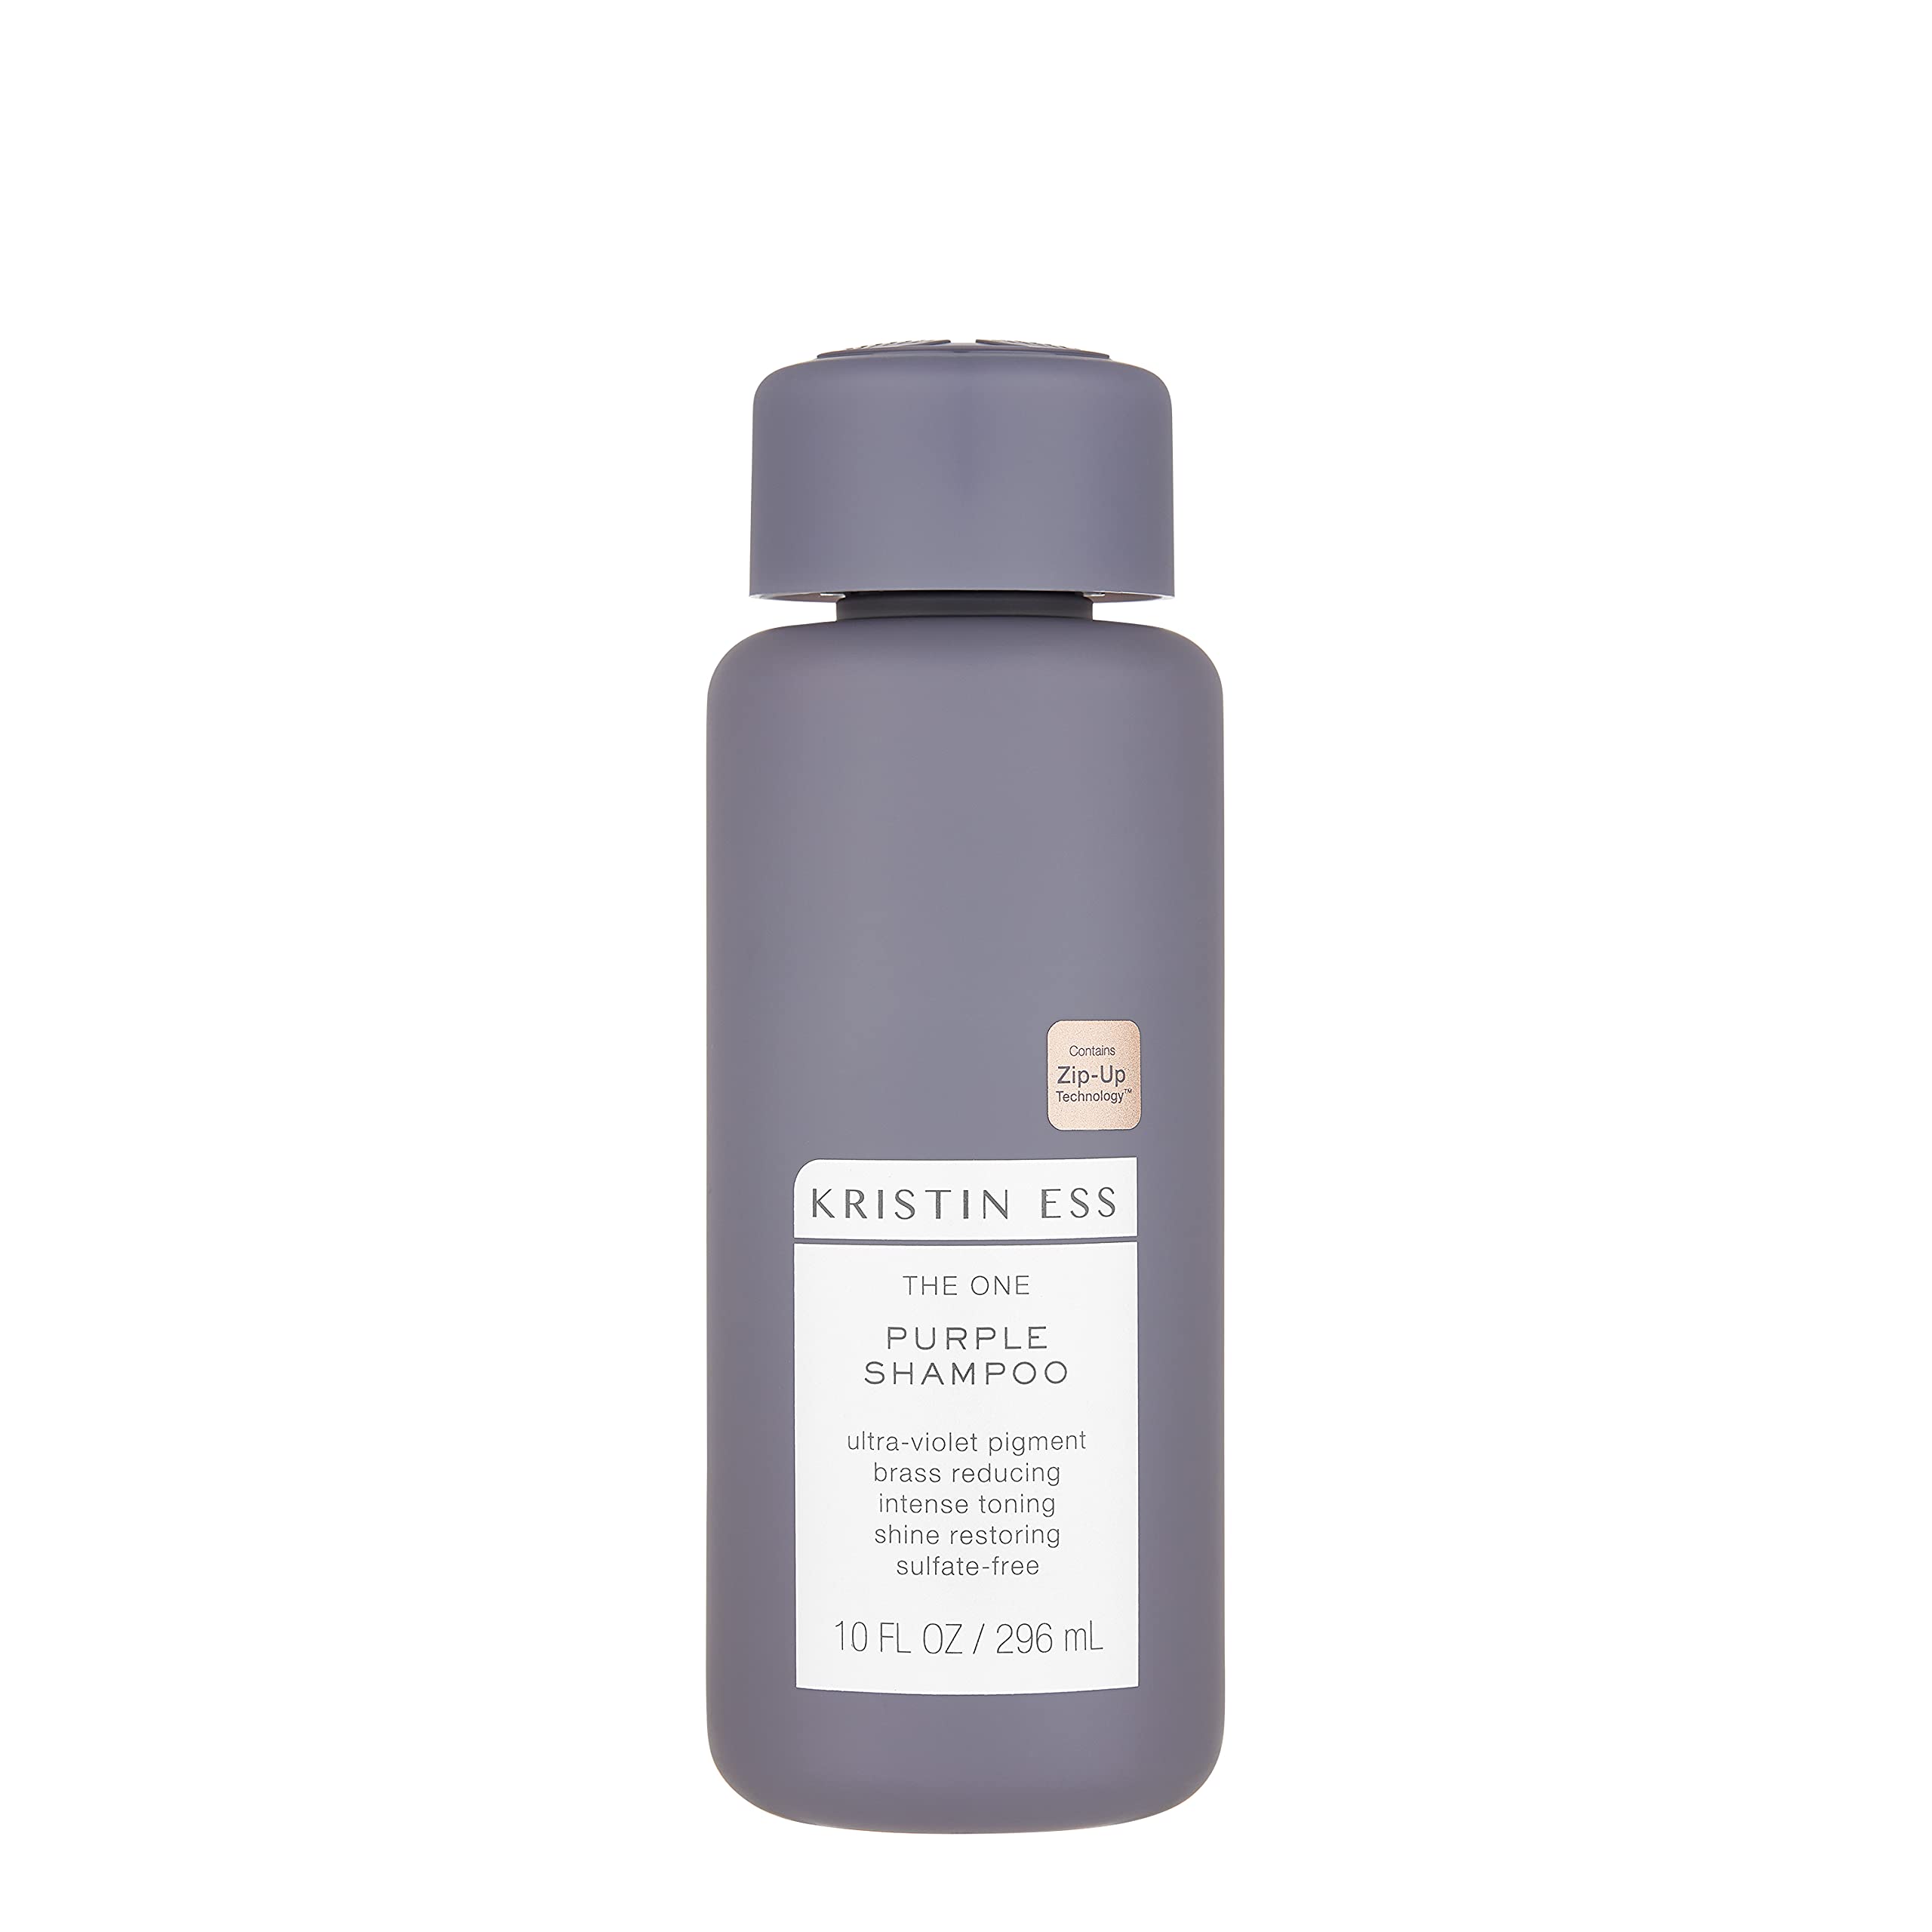 Kristin Ess Hair The One Purple Shampoo, Toning for Blonde Hair, Neutralizes Brass + Yellow Tones, Sulfate, Silicone and Paraben Free, 10 fl. oz.